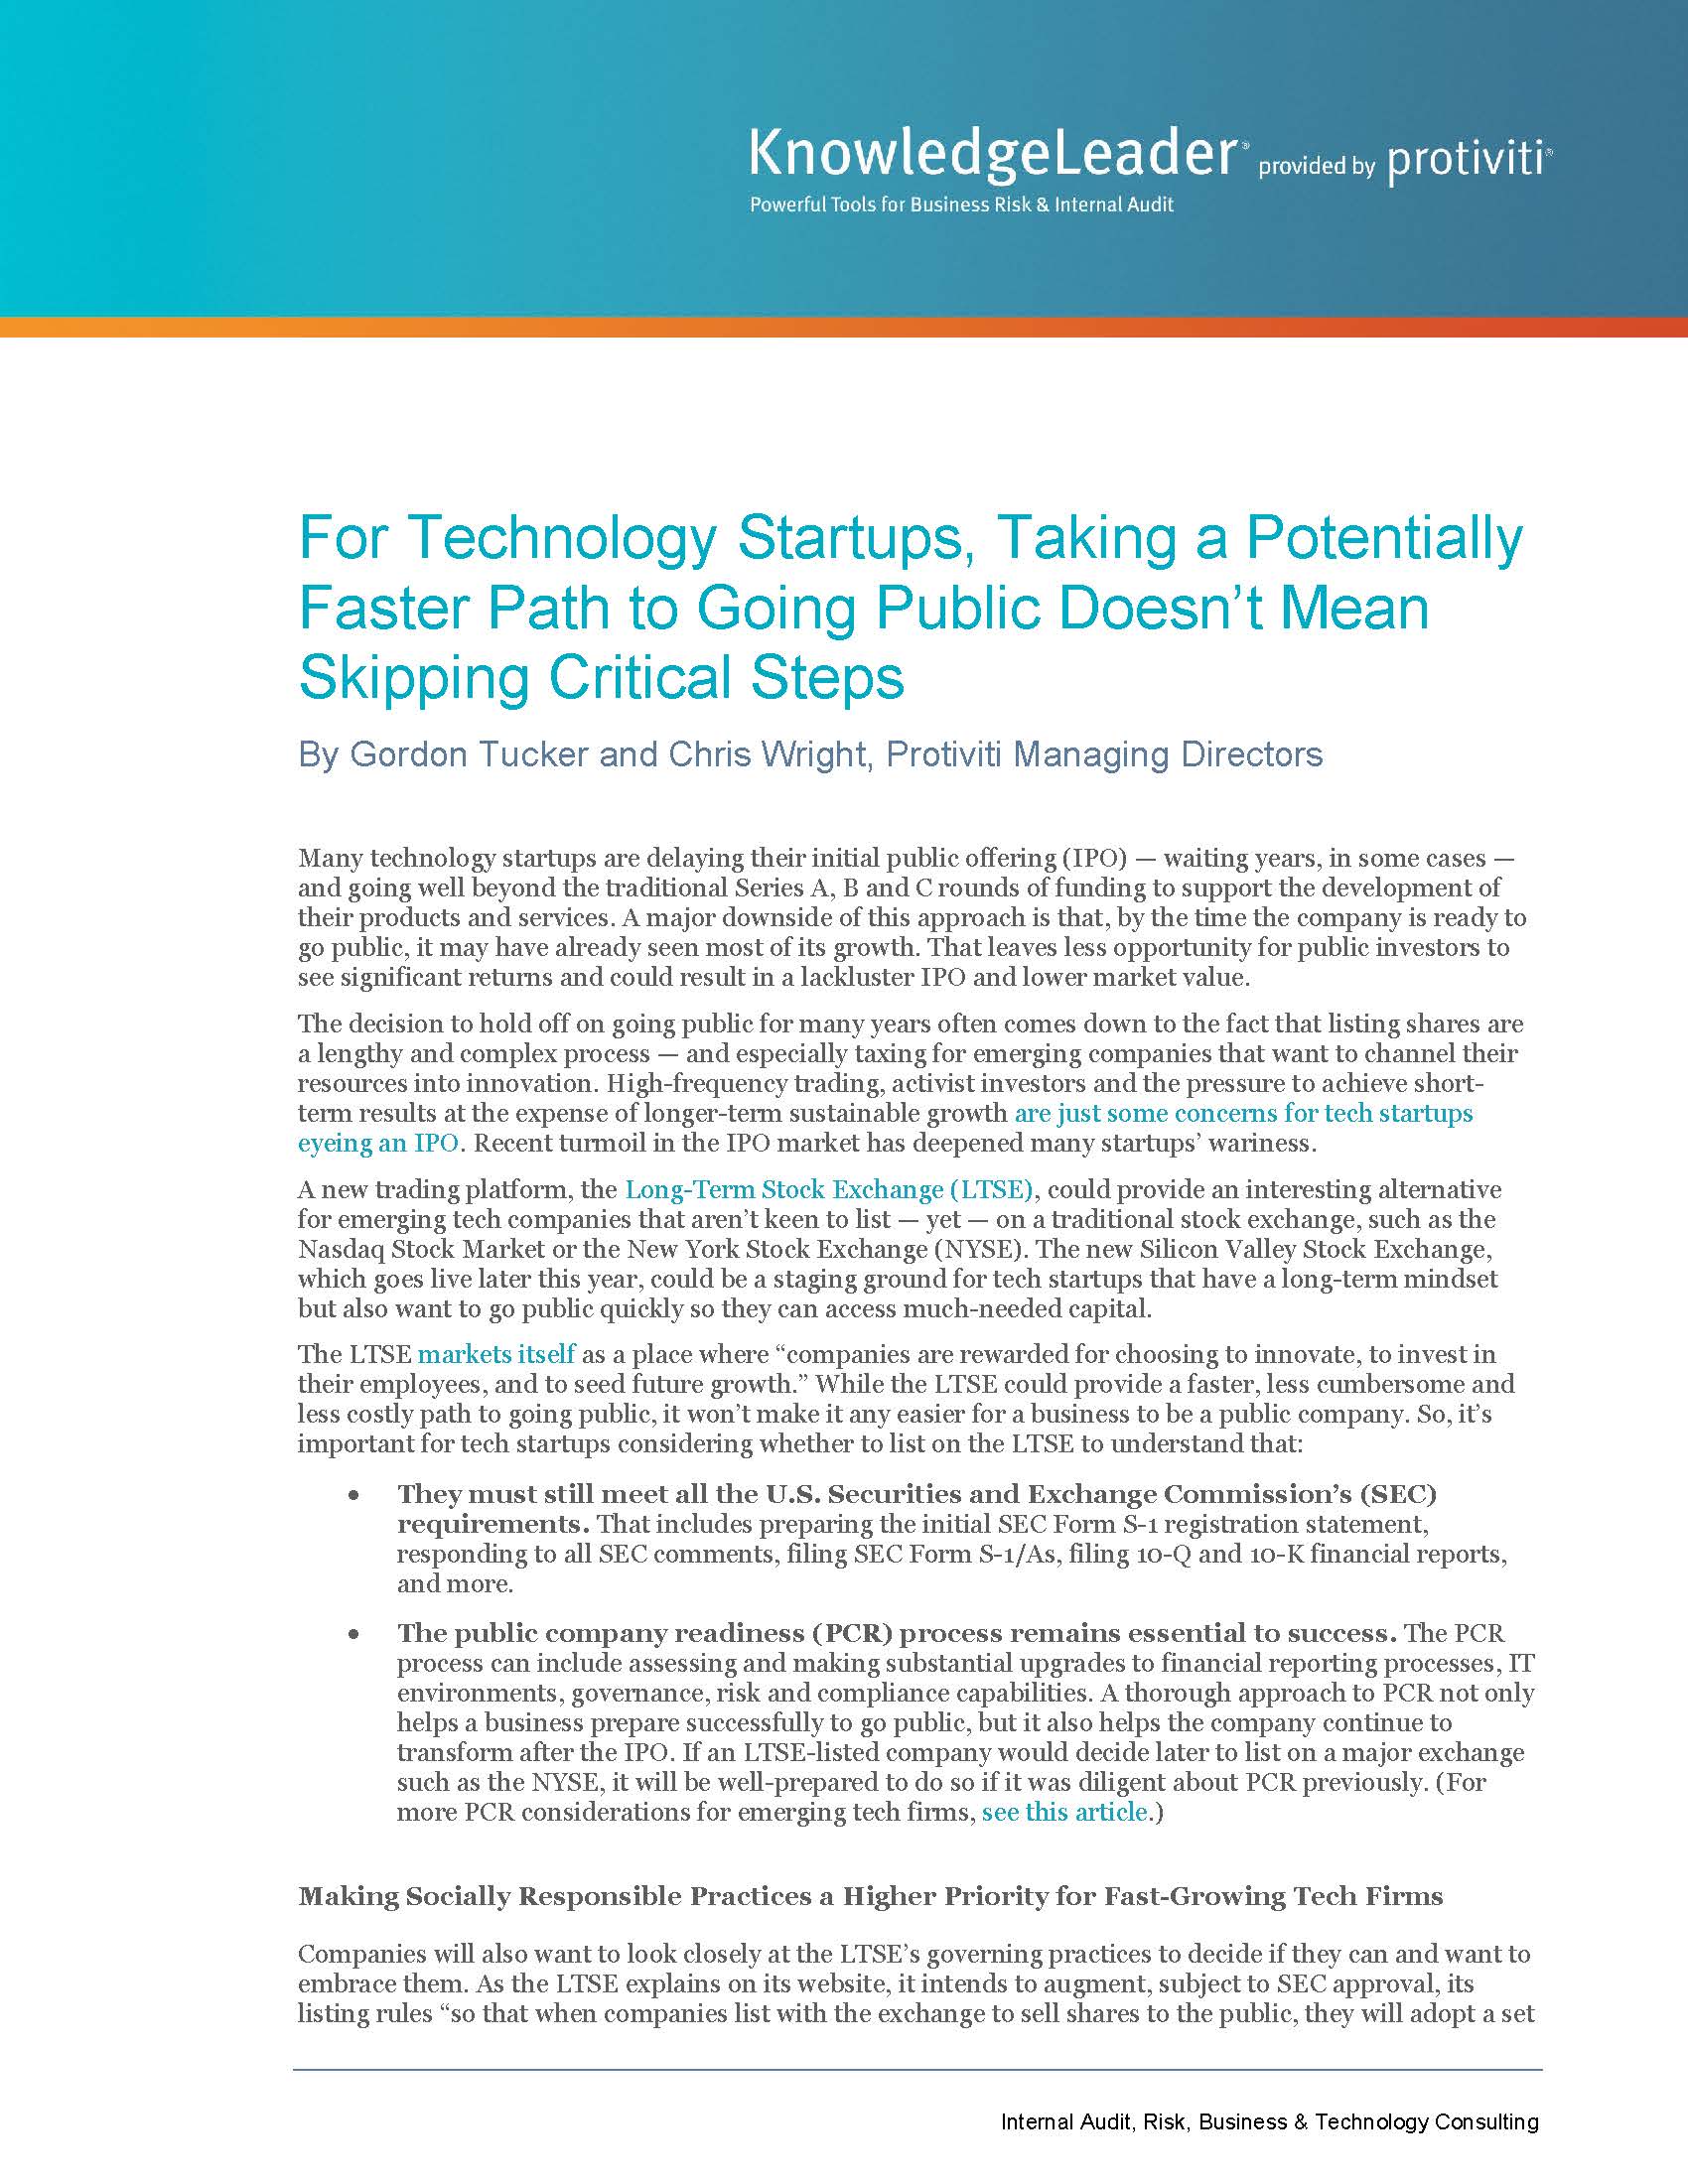 Screenshot of the first page of For Technology Startups, Taking a Potentially Faster Path to Going Public Doesn’t Mean Skipping Critical Steps